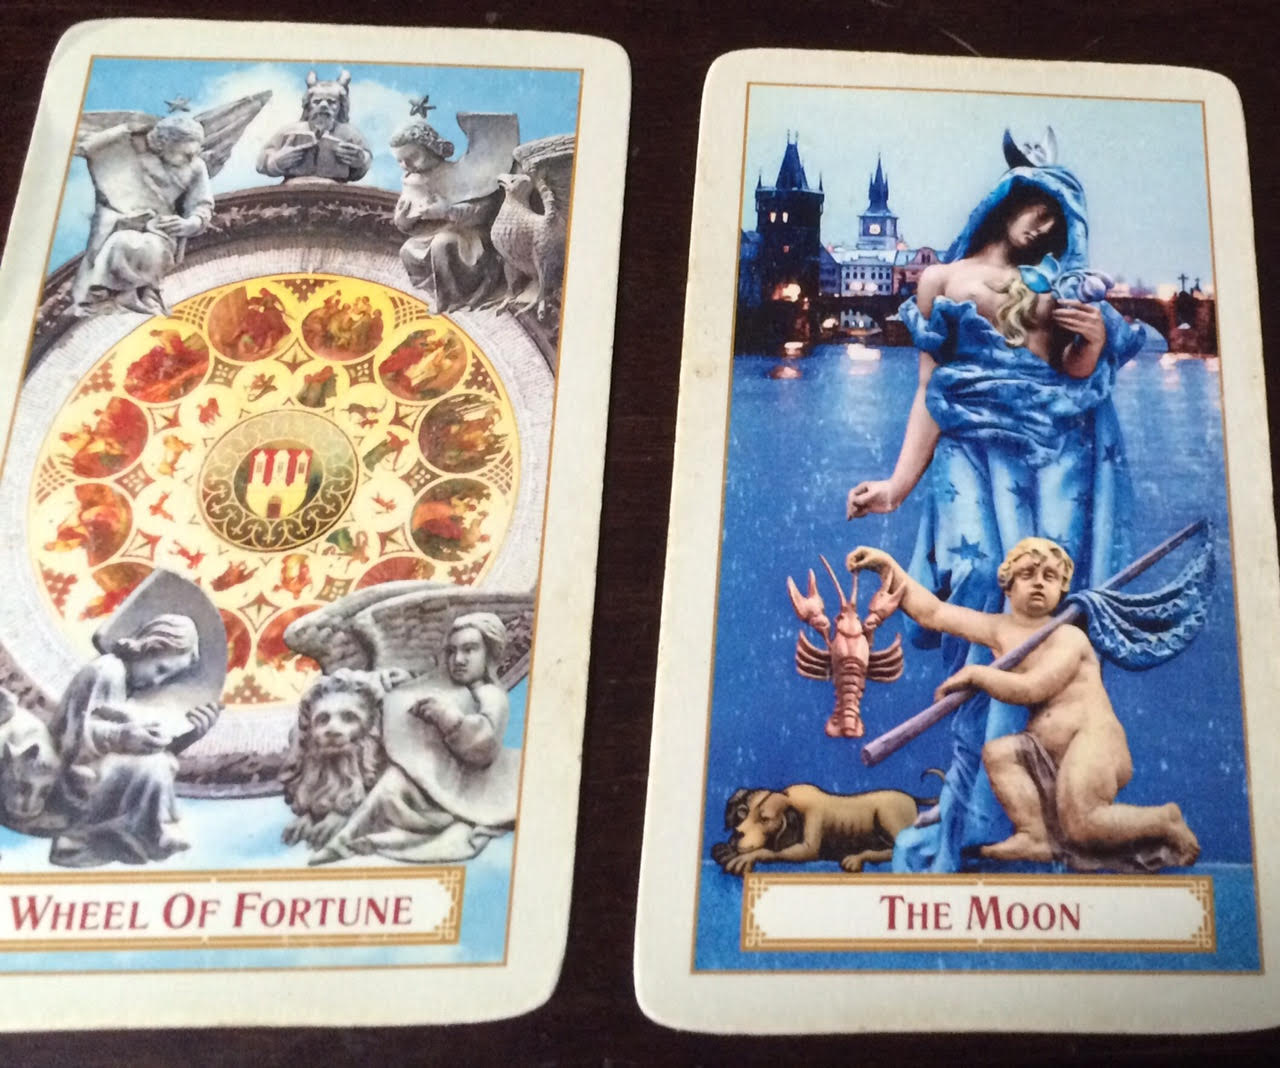 The Wheel of Fortune and The Moon -- shown here from the Tarot of Prague deck, available from Baba Studios -- are both associated with Pisces.